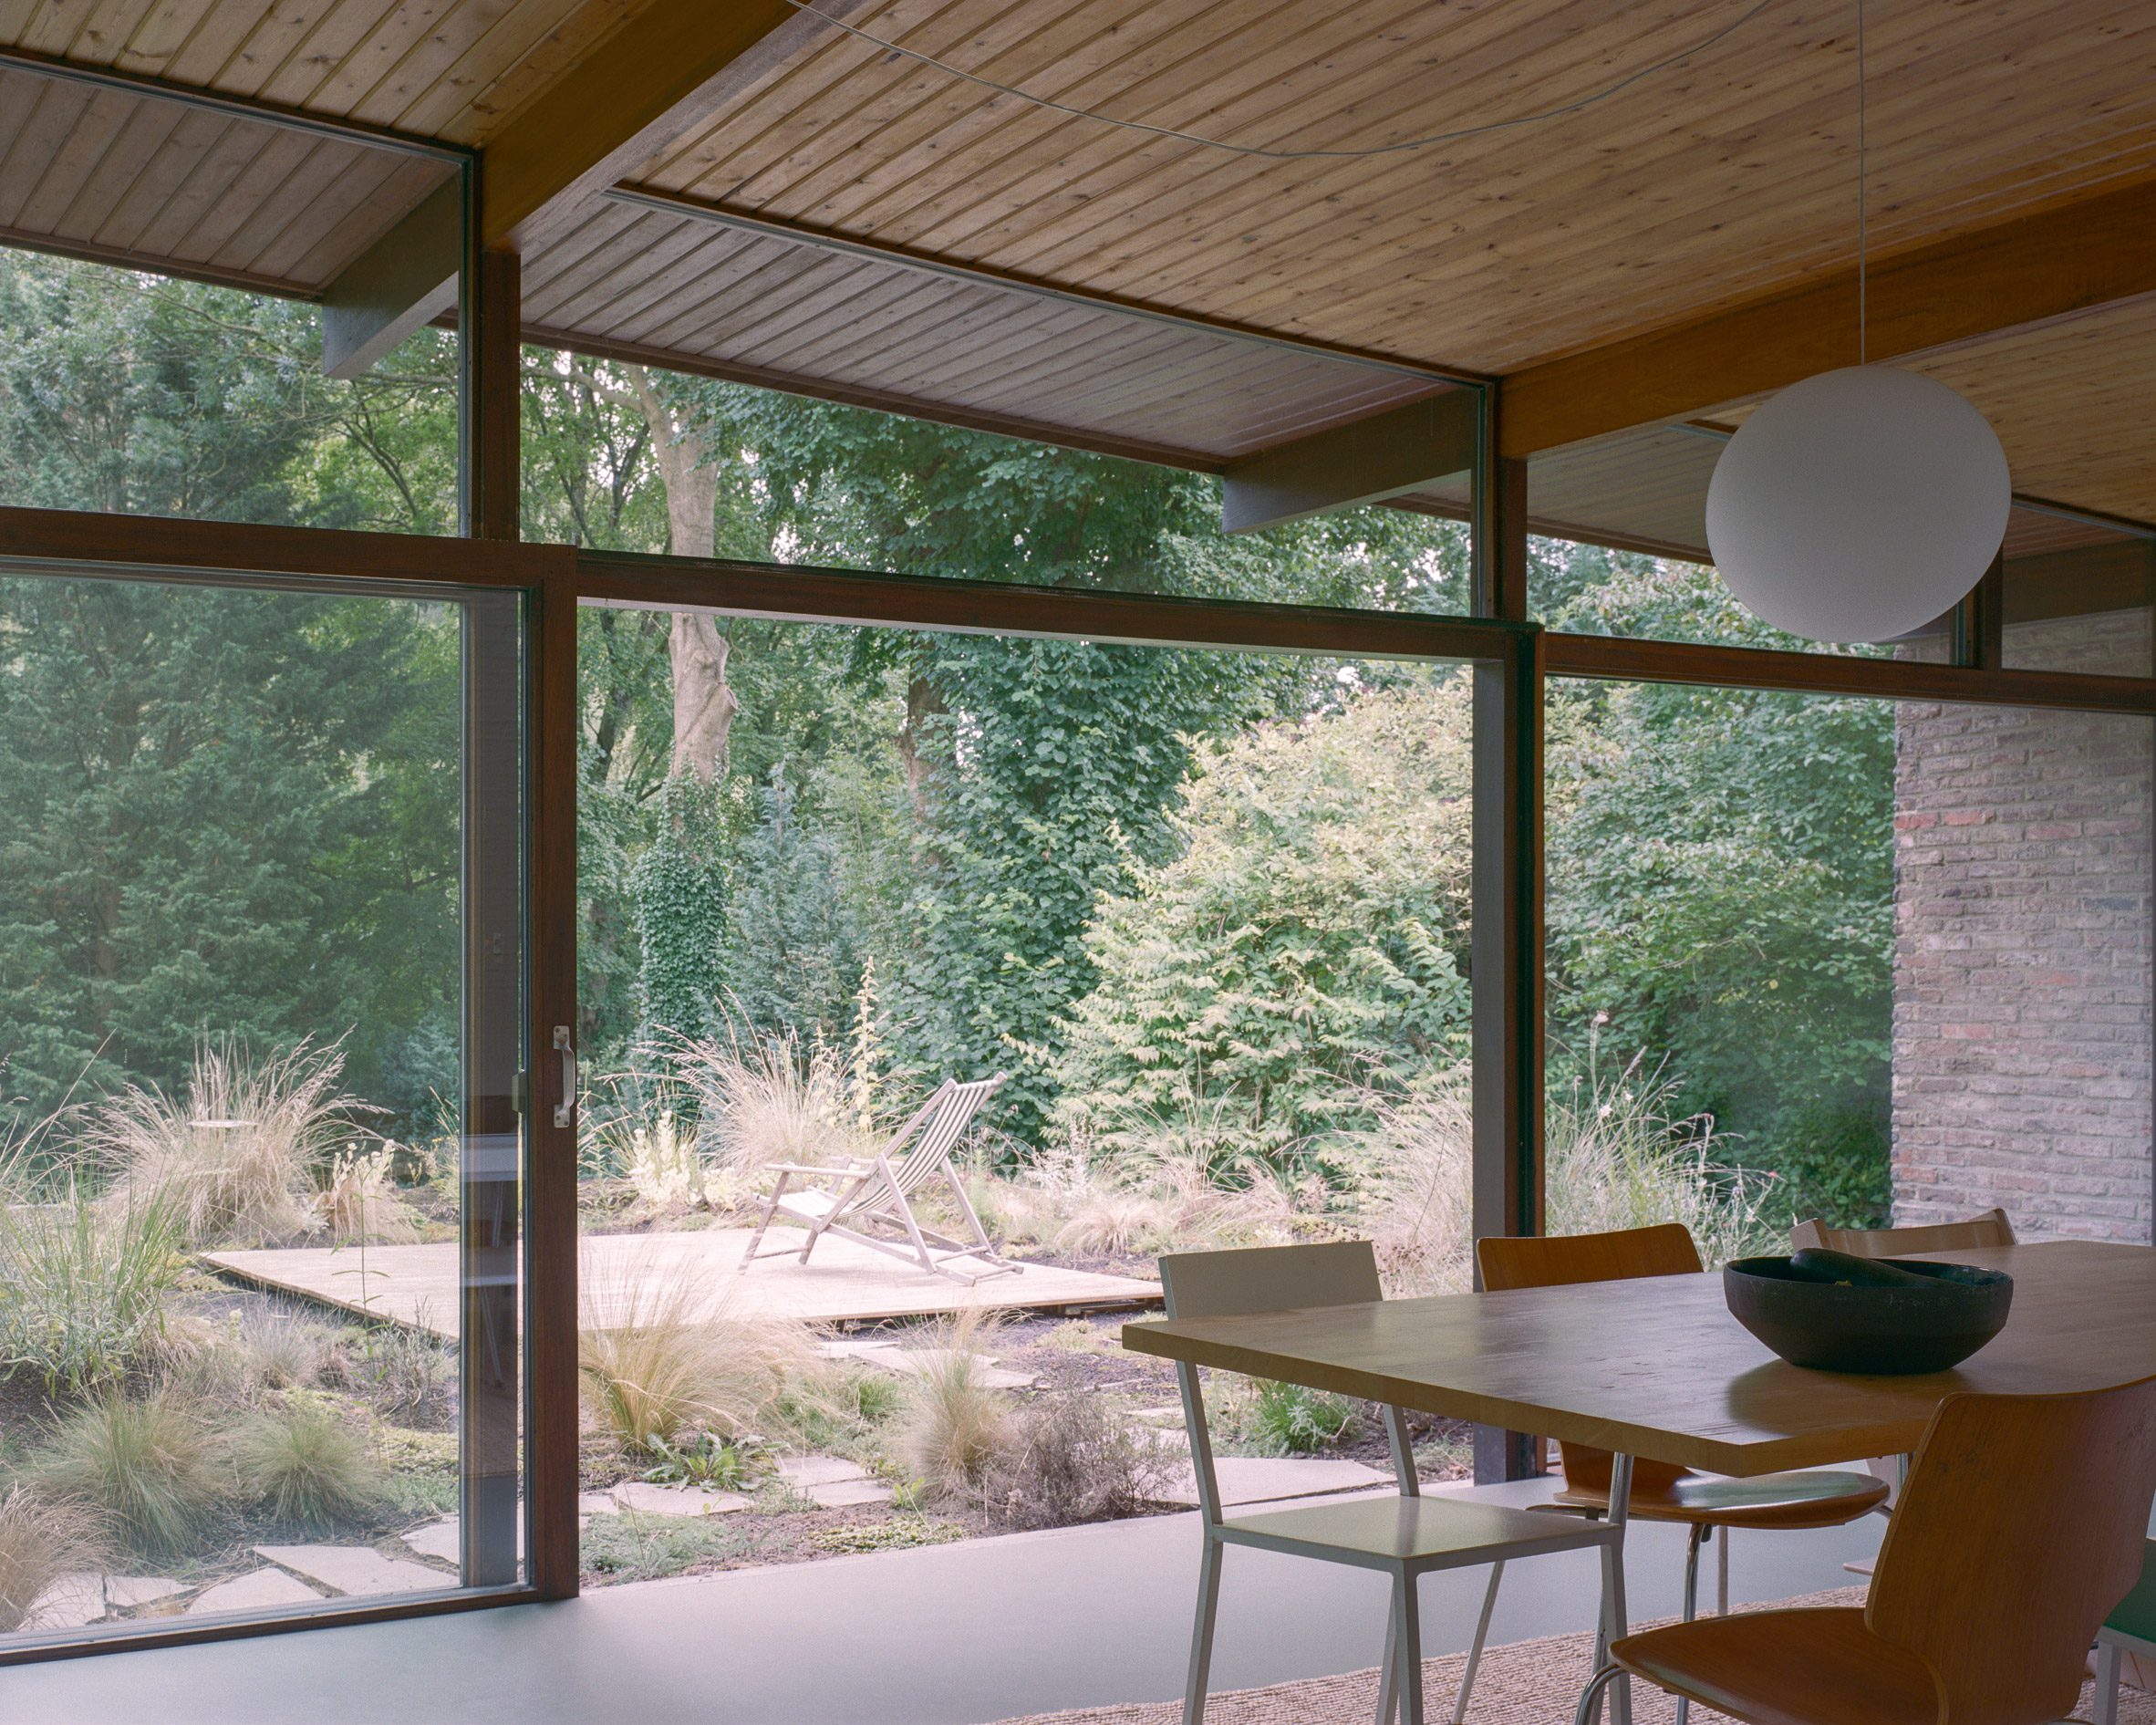 Open-plan dining room with a timber-framed glazed facade overlooking a garden